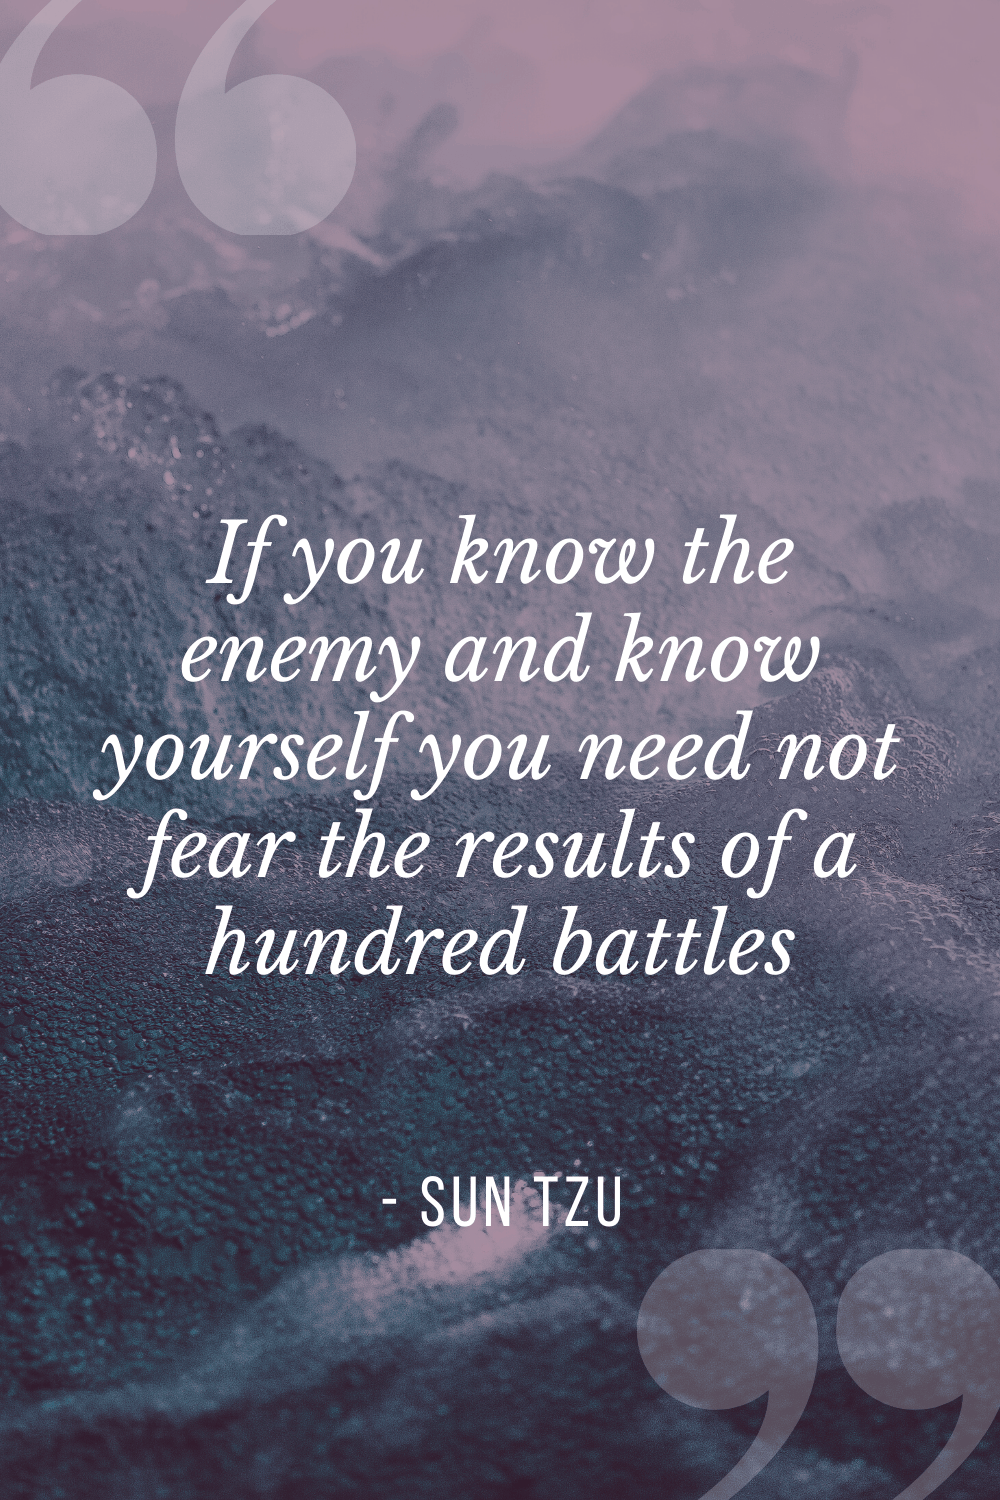 “If you know the enemy and know yourself you need not fear the results of a hundred battles”, Sun Tzu